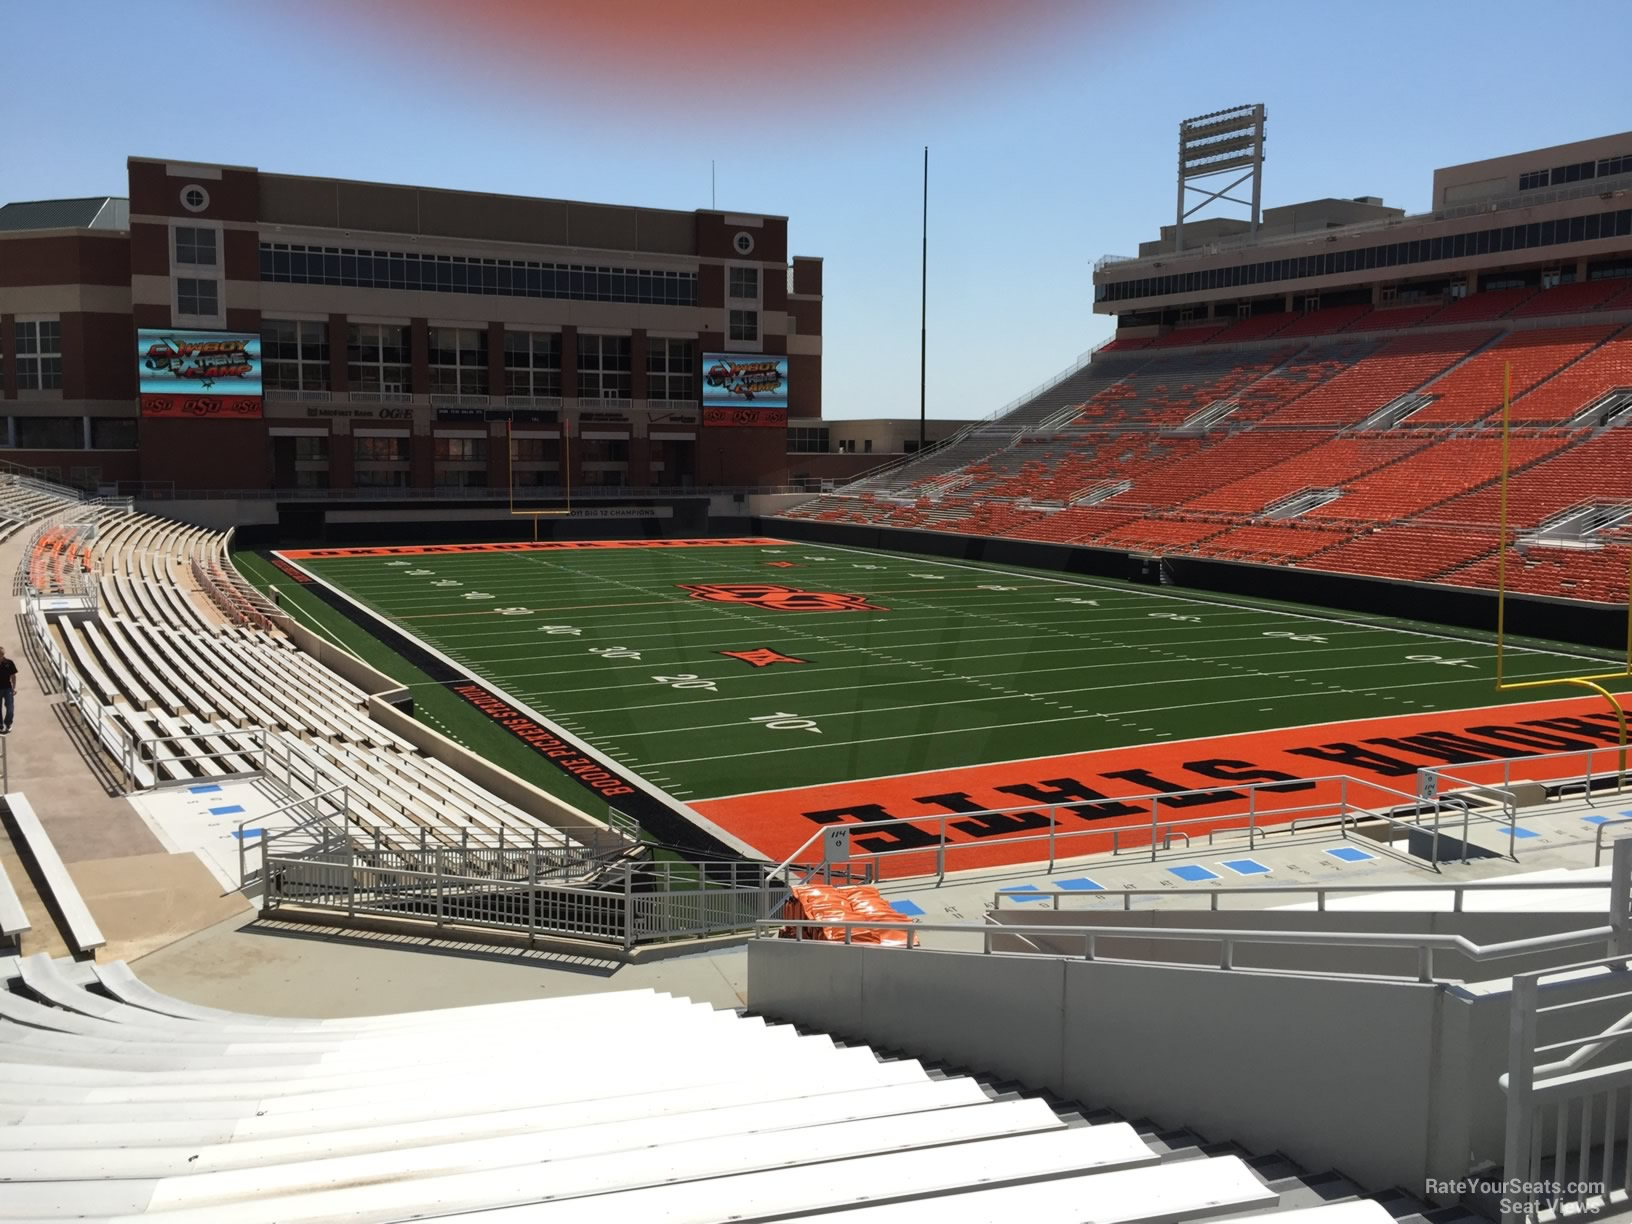 section 220, row 20 seat view  - boone pickens stadium